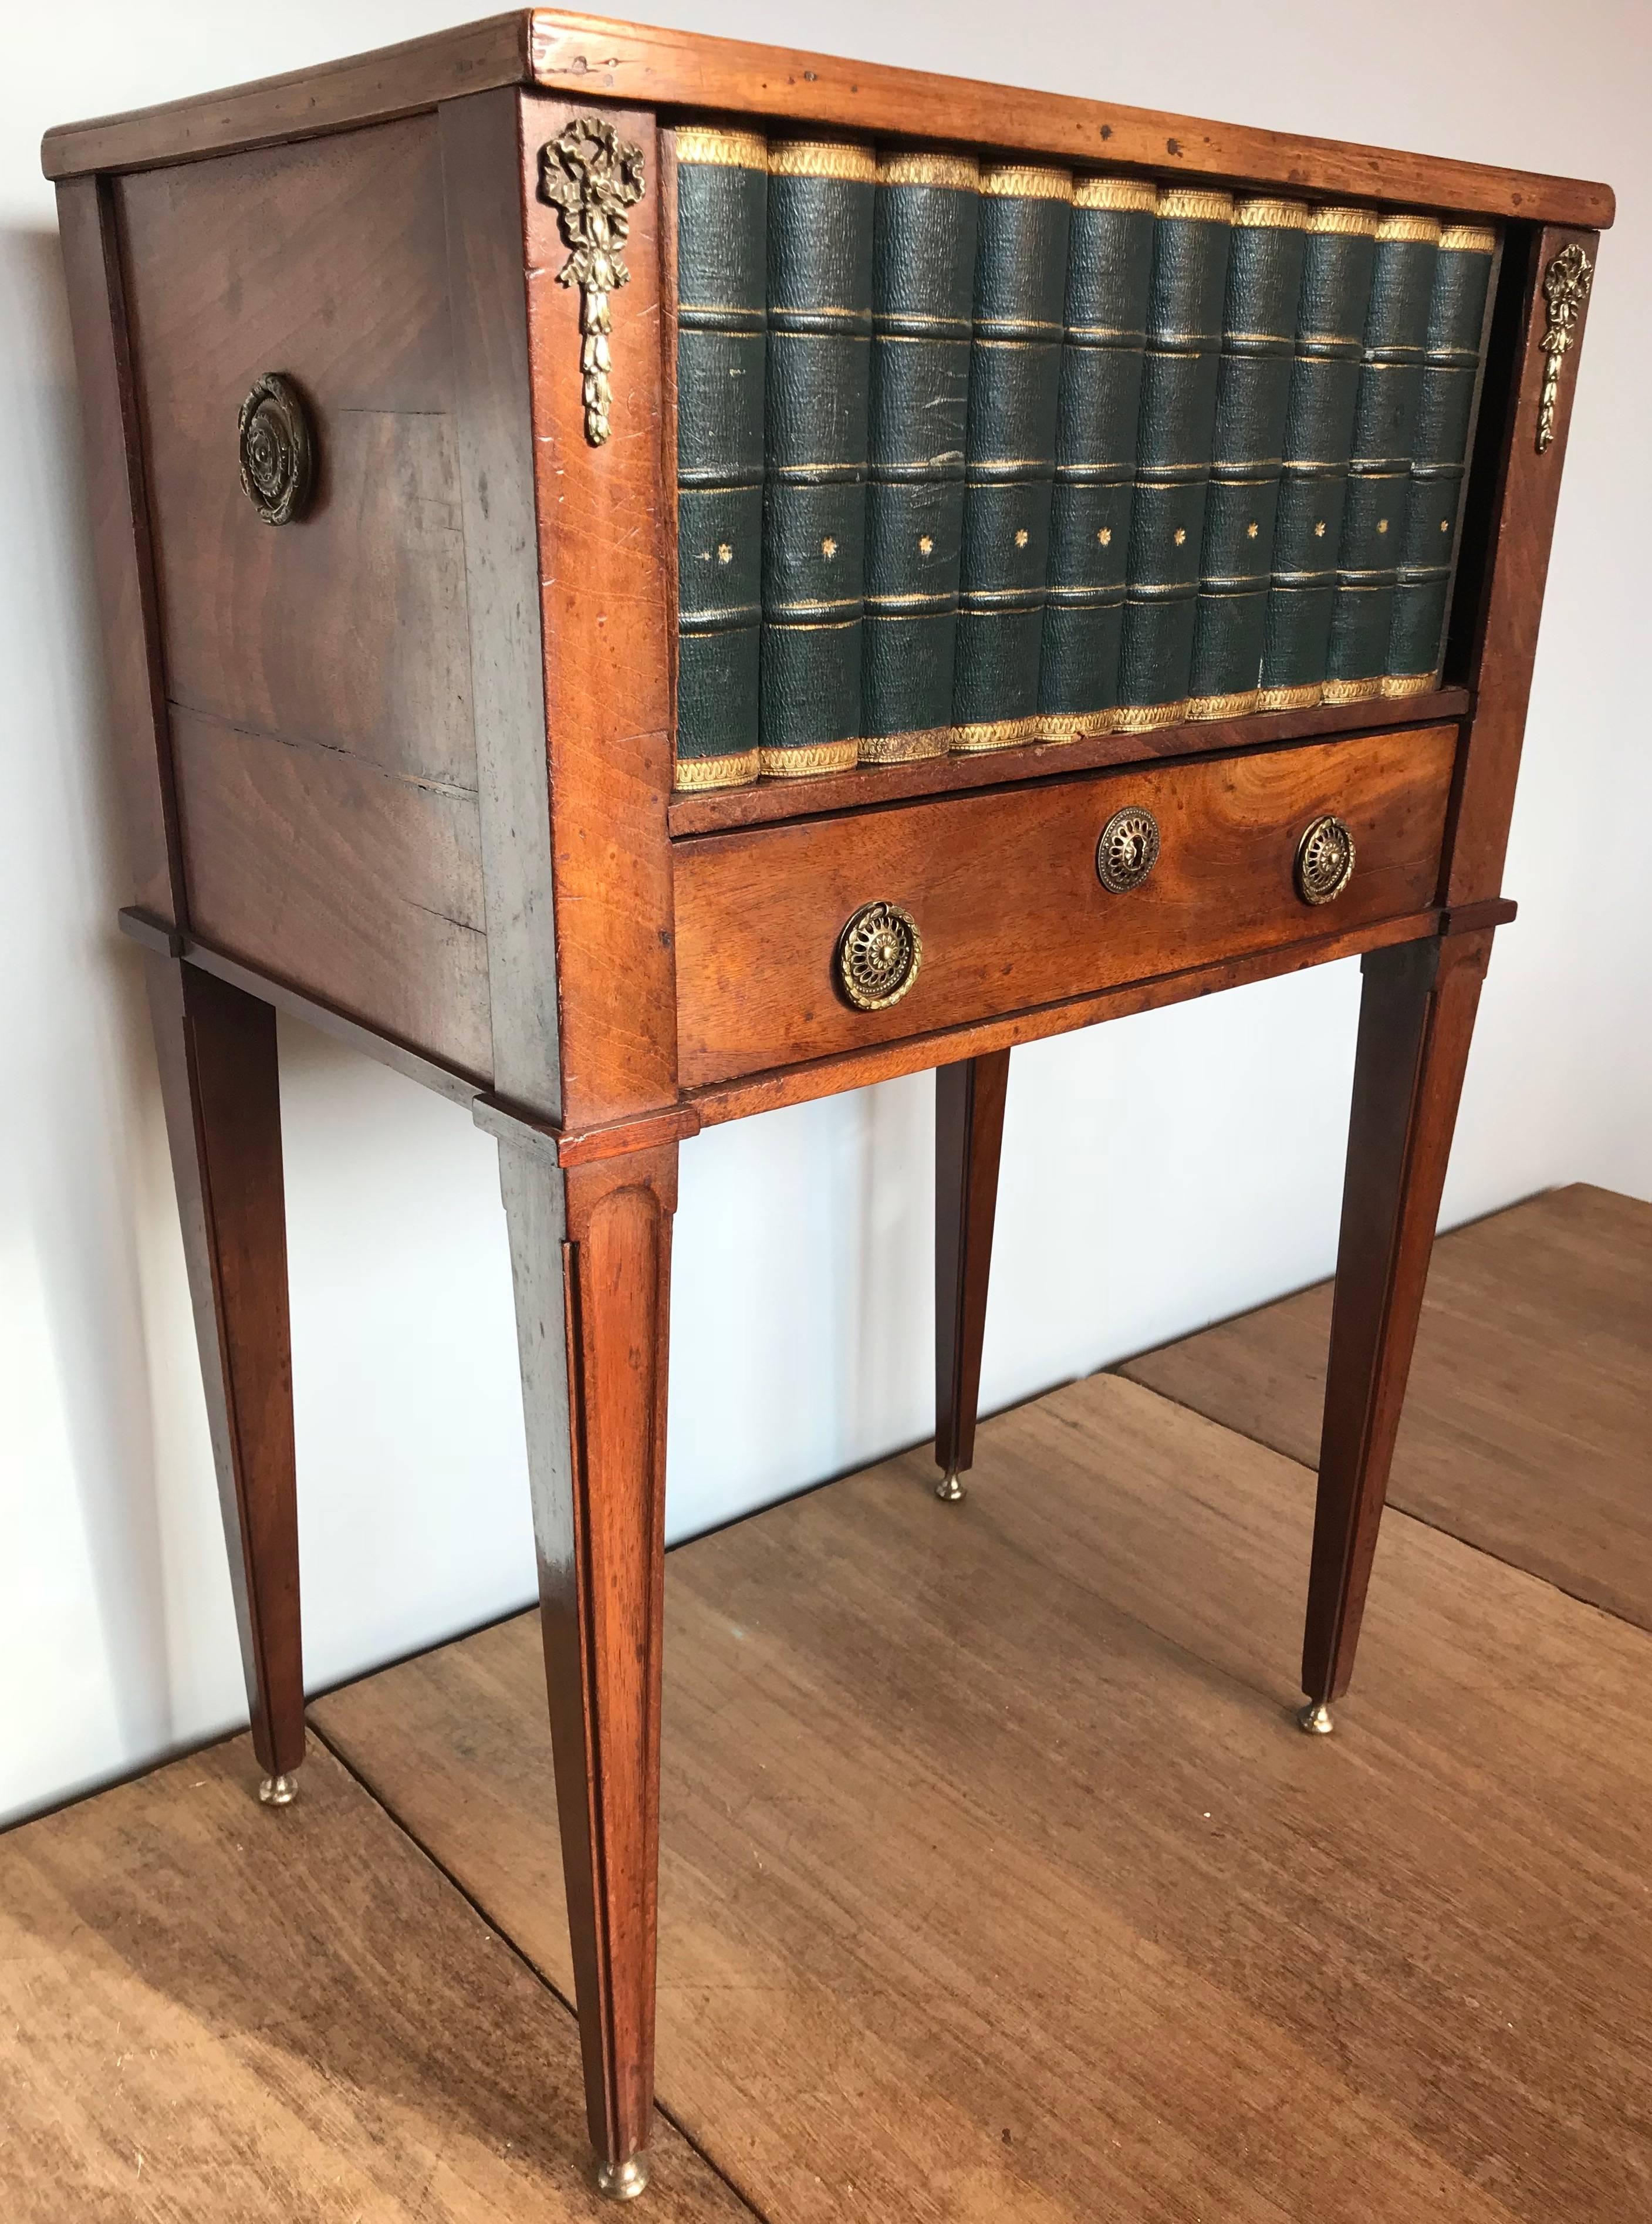 Stylish and practical antique little cabinet/table.

This early 20th century, small size and rare little cabinet can be used for all kinds of purposes: end table, side table, drinks cabinet, telephone table, magazine stand, bedside cabinet, library